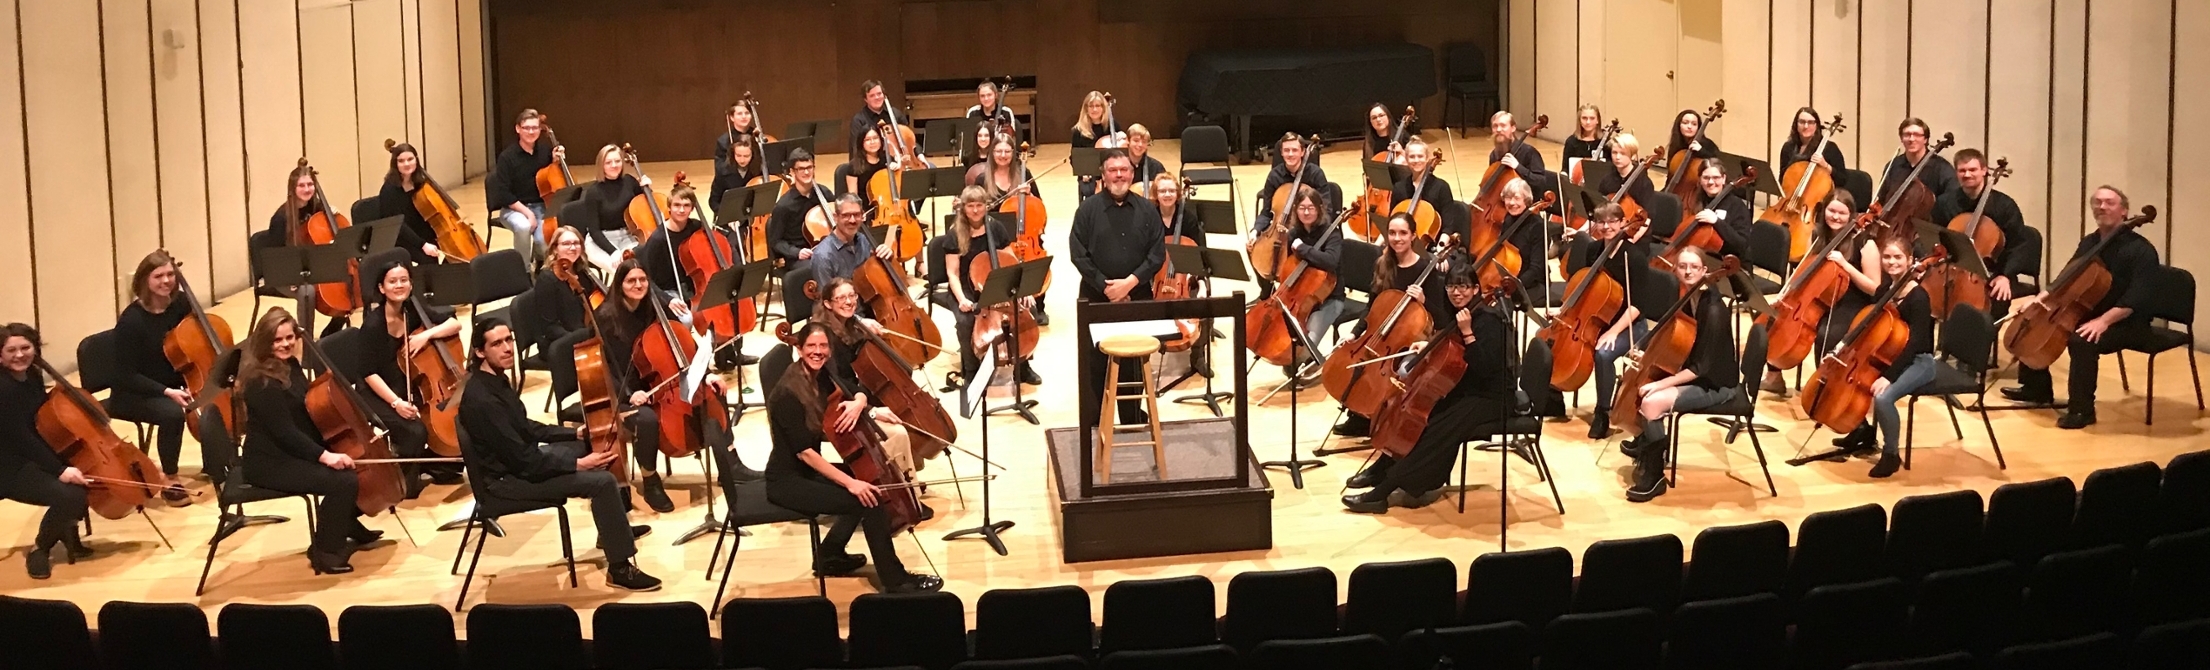 Cello Choir, conducted by Dr. Michael Griffith